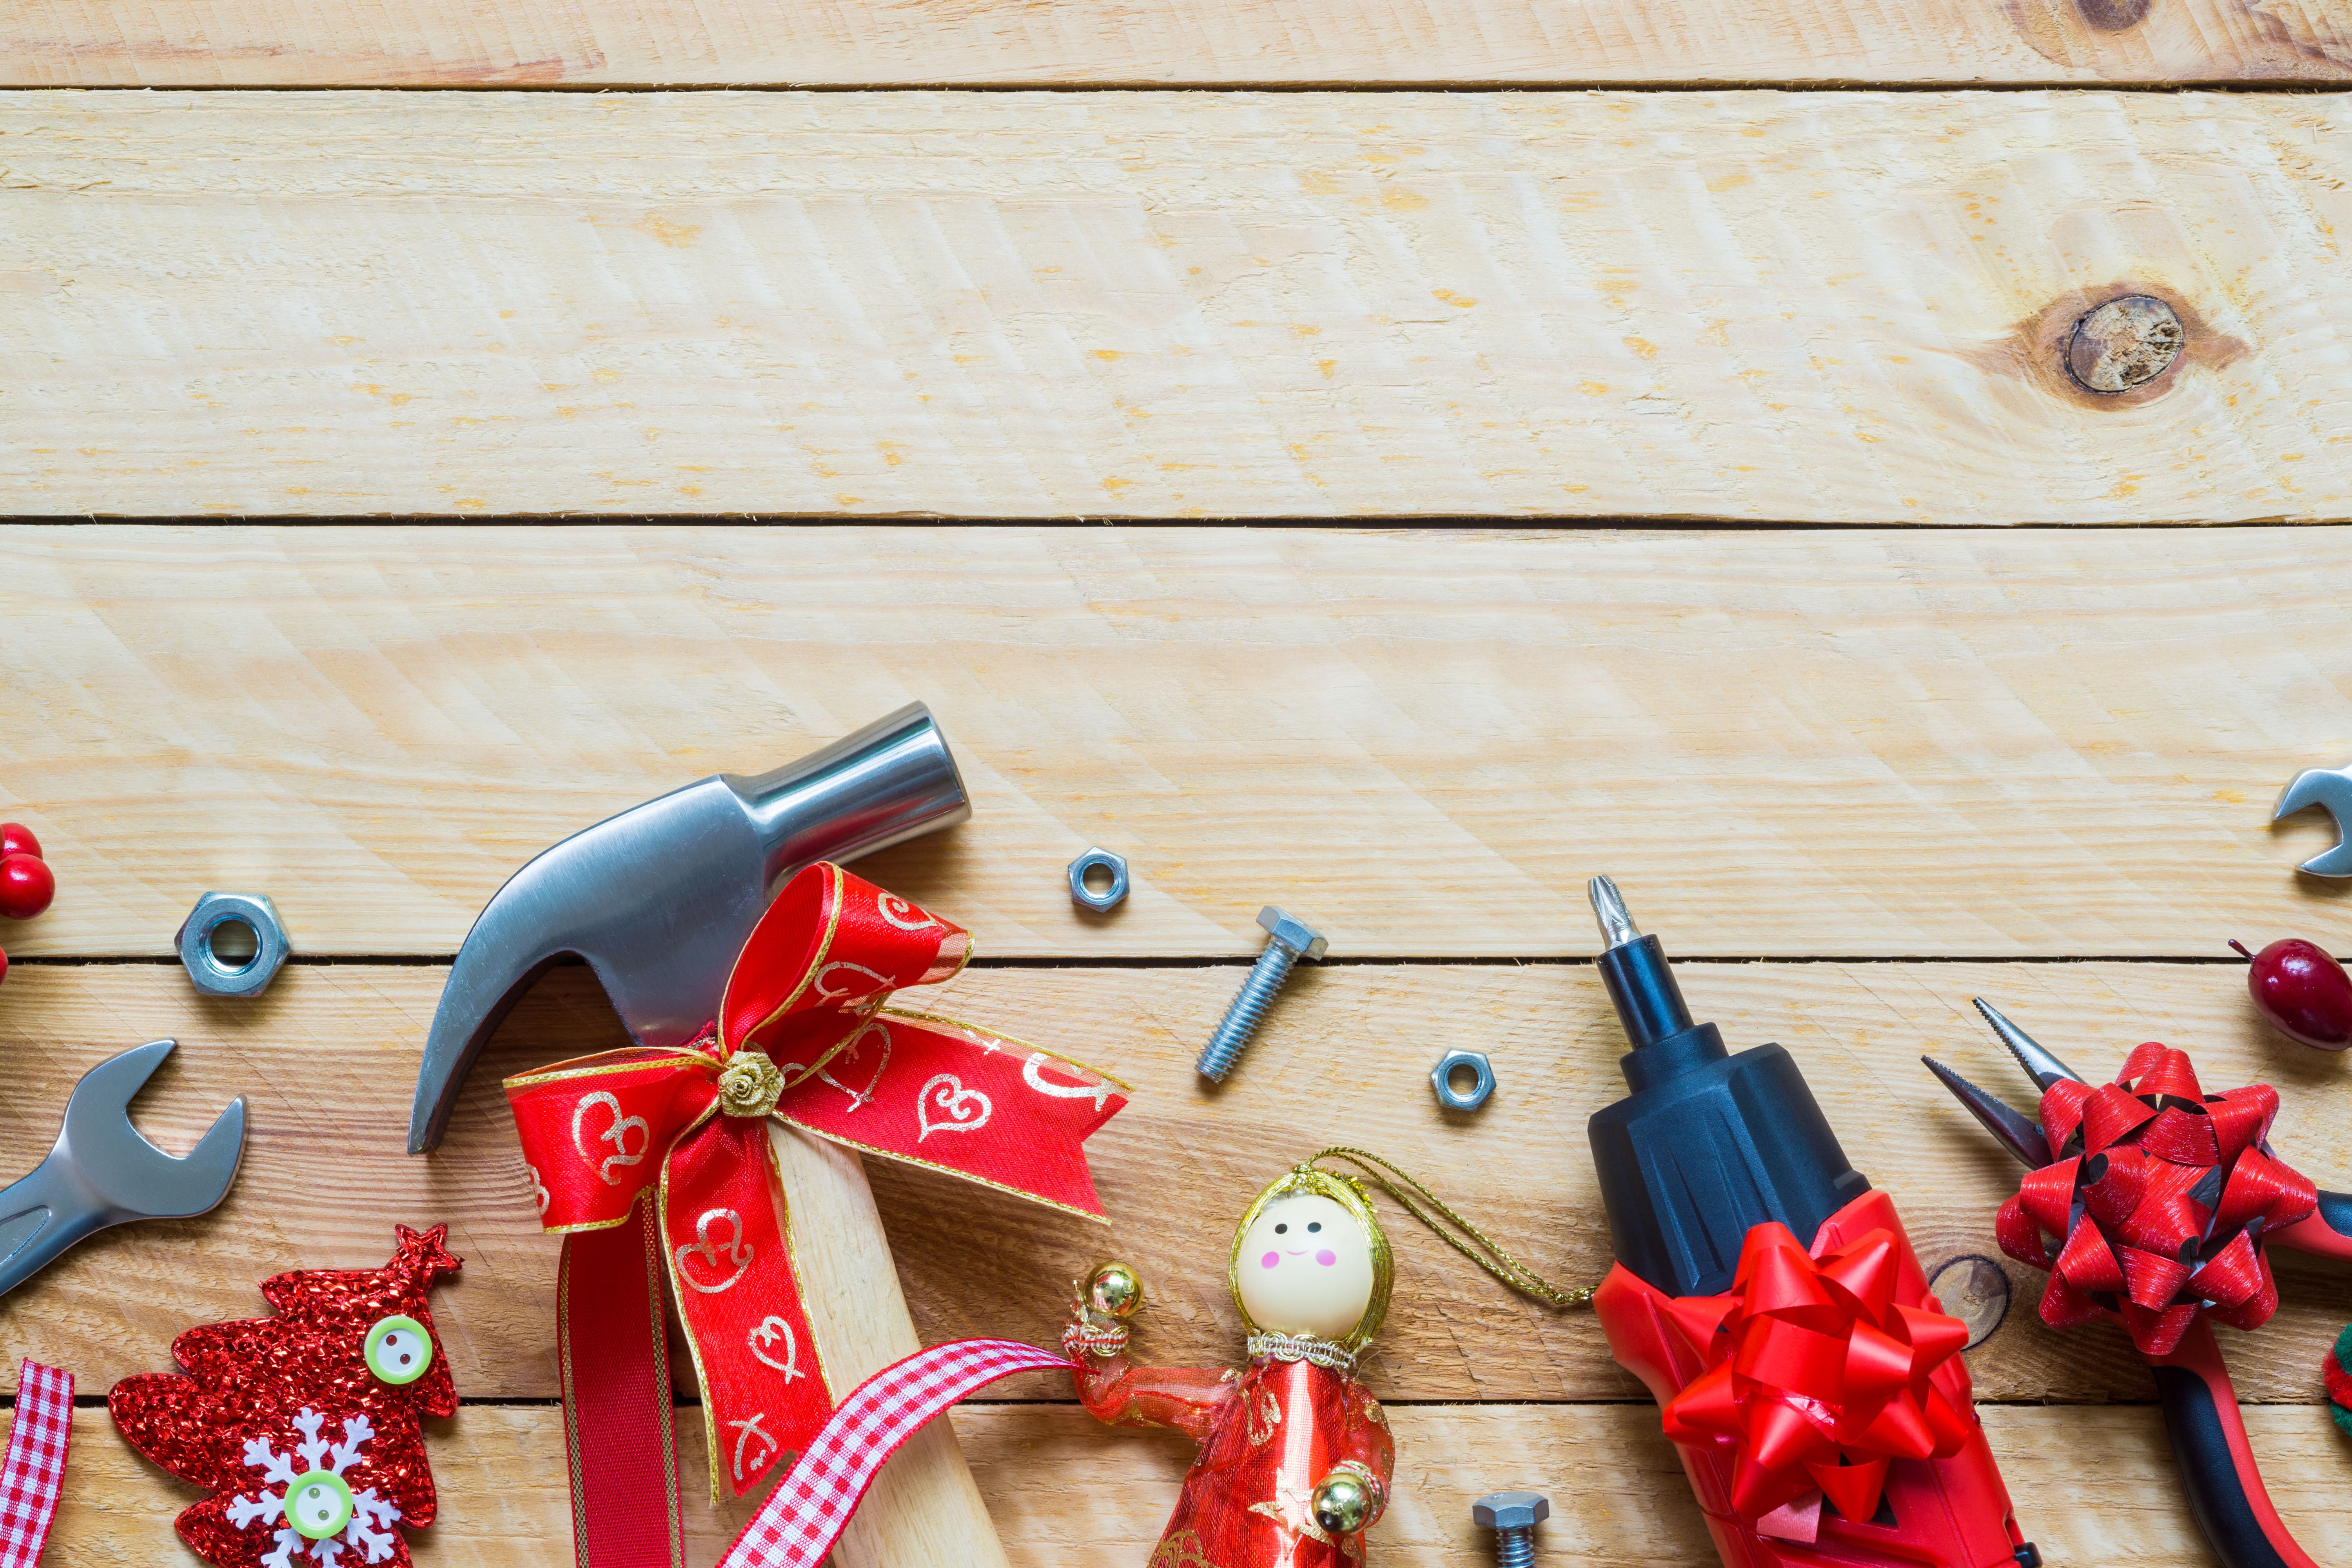 Flat lay of a wrench, a hammer, pliers, bolts, and screws with ribbon and bows in front of a wooden backdrop